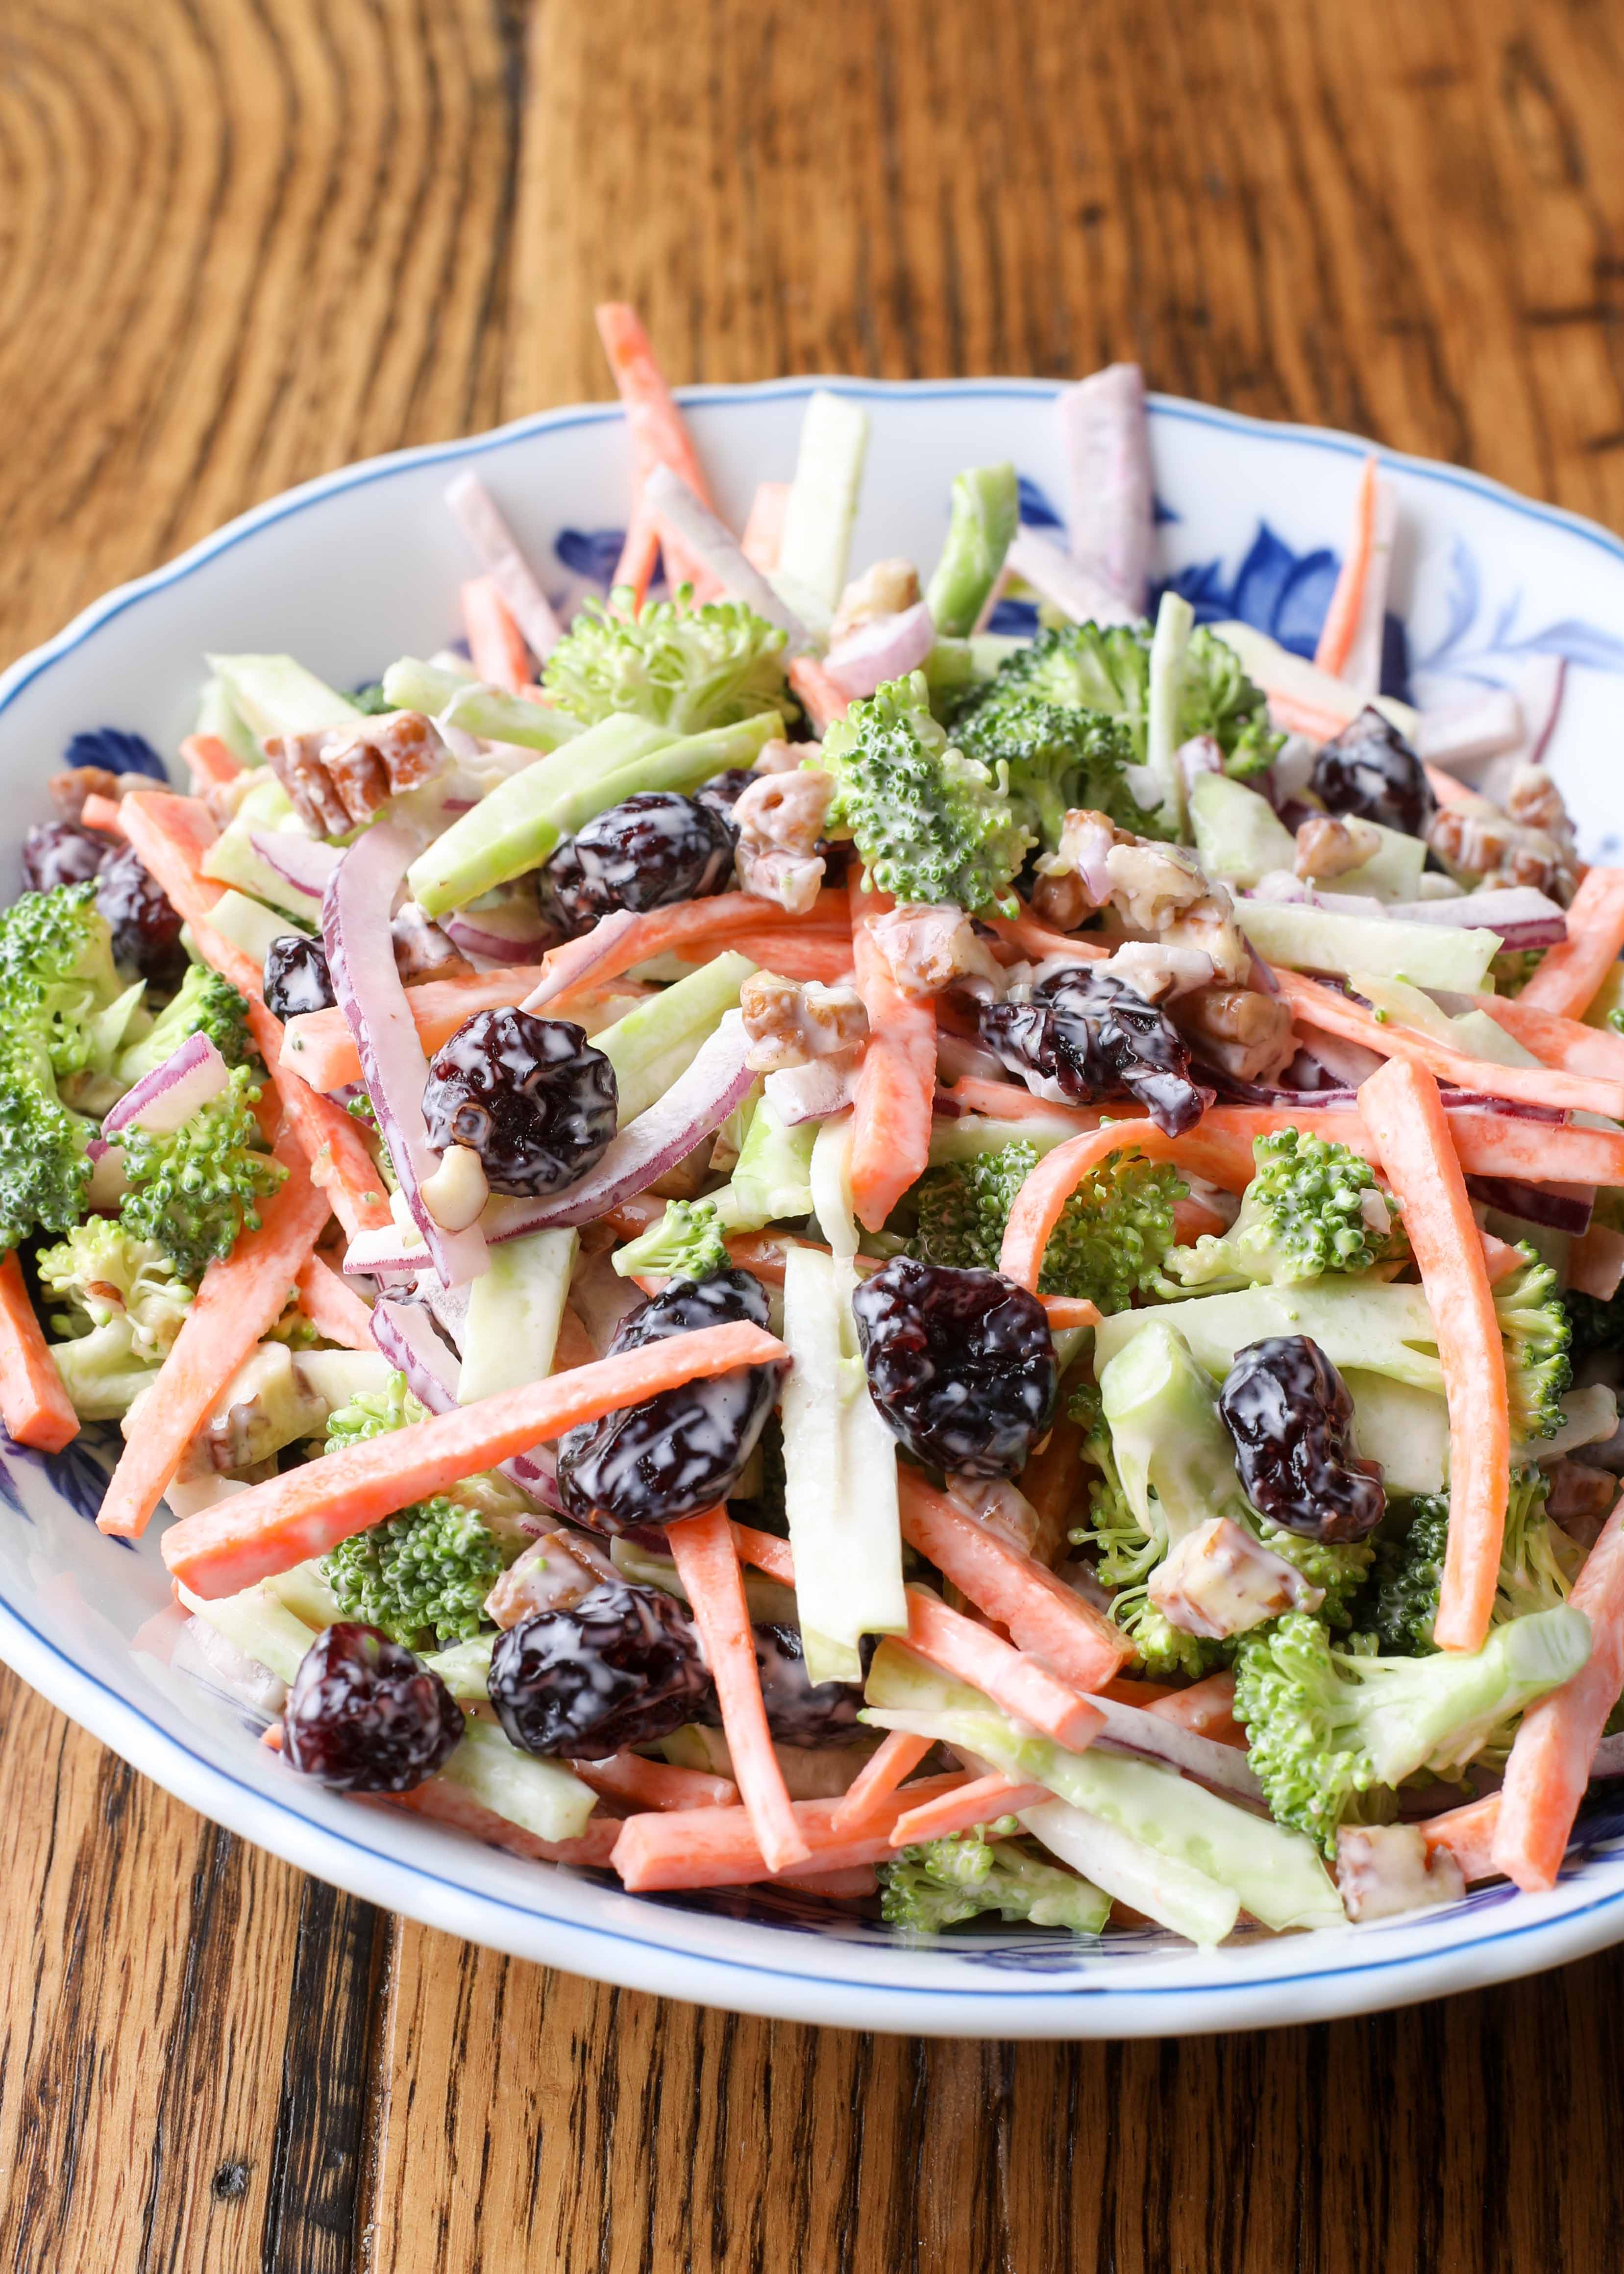 Broccoli Slaw With Miso-Ginger Dressing Recipe | Epicurious